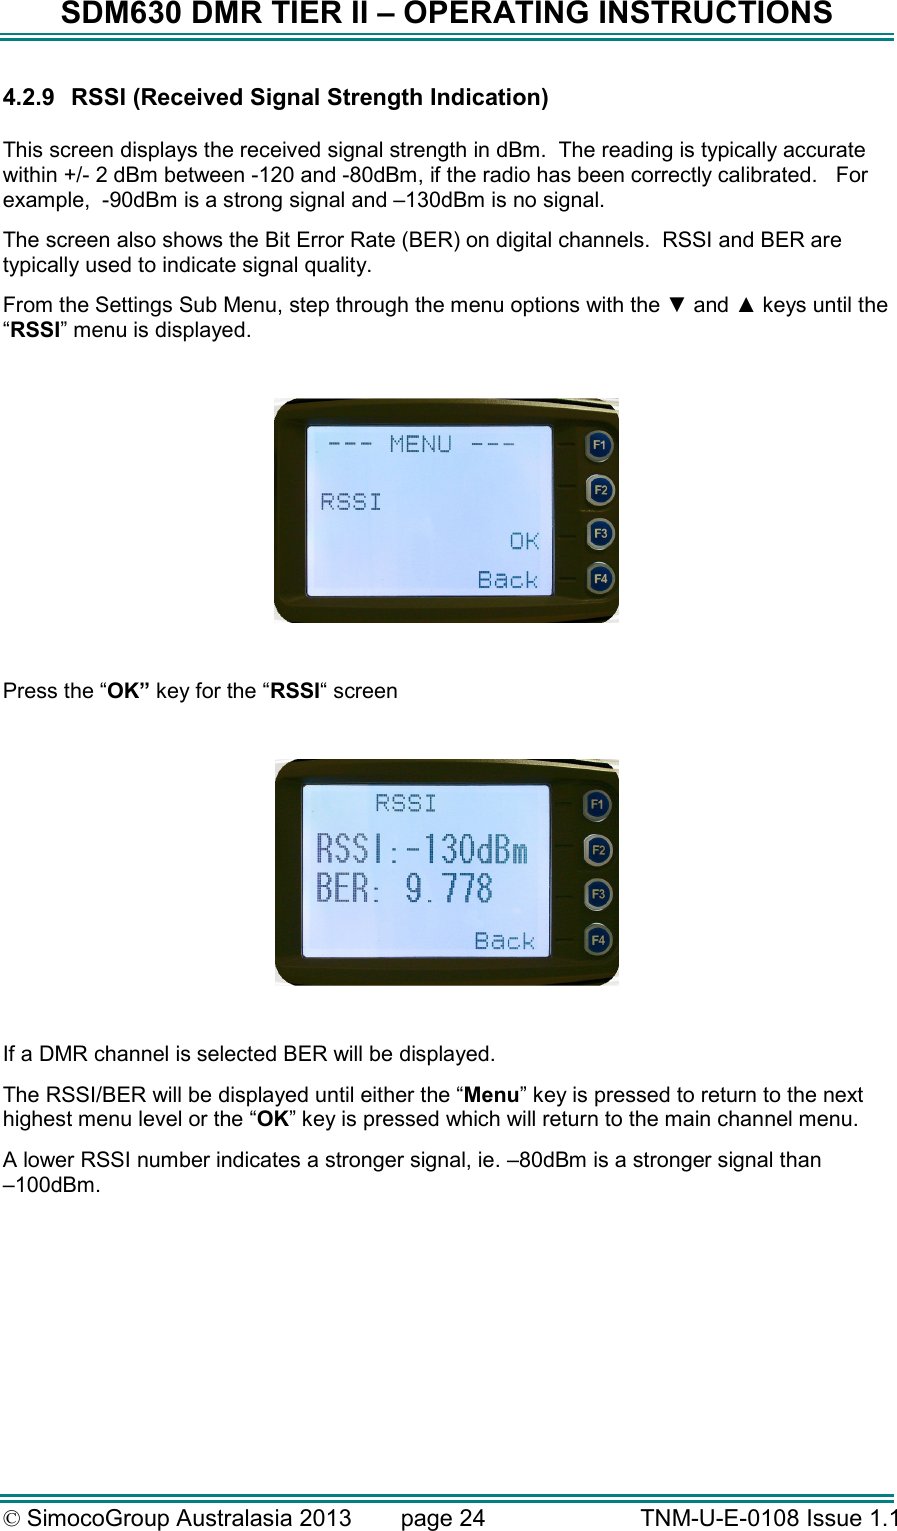 SDM630 DMR TIER II – OPERATING INSTRUCTIONS © SimocoGroup Australasia 2013   page 24   TNM-U-E-0108 Issue 1.1 4.2.9  RSSI (Received Signal Strength Indication)  This screen displays the received signal strength in dBm.  The reading is typically accurate within +/- 2 dBm between -120 and -80dBm, if the radio has been correctly calibrated.   For example,  -90dBm is a strong signal and –130dBm is no signal. The screen also shows the Bit Error Rate (BER) on digital channels.  RSSI and BER are typically used to indicate signal quality. From the Settings Sub Menu, step through the menu options with the ▼ and ▲ keys until the “RSSI” menu is displayed.    Press the “OK” key for the “RSSI“ screen    If a DMR channel is selected BER will be displayed. The RSSI/BER will be displayed until either the “Menu” key is pressed to return to the next highest menu level or the “OK” key is pressed which will return to the main channel menu. A lower RSSI number indicates a stronger signal, ie. –80dBm is a stronger signal than  –100dBm.     